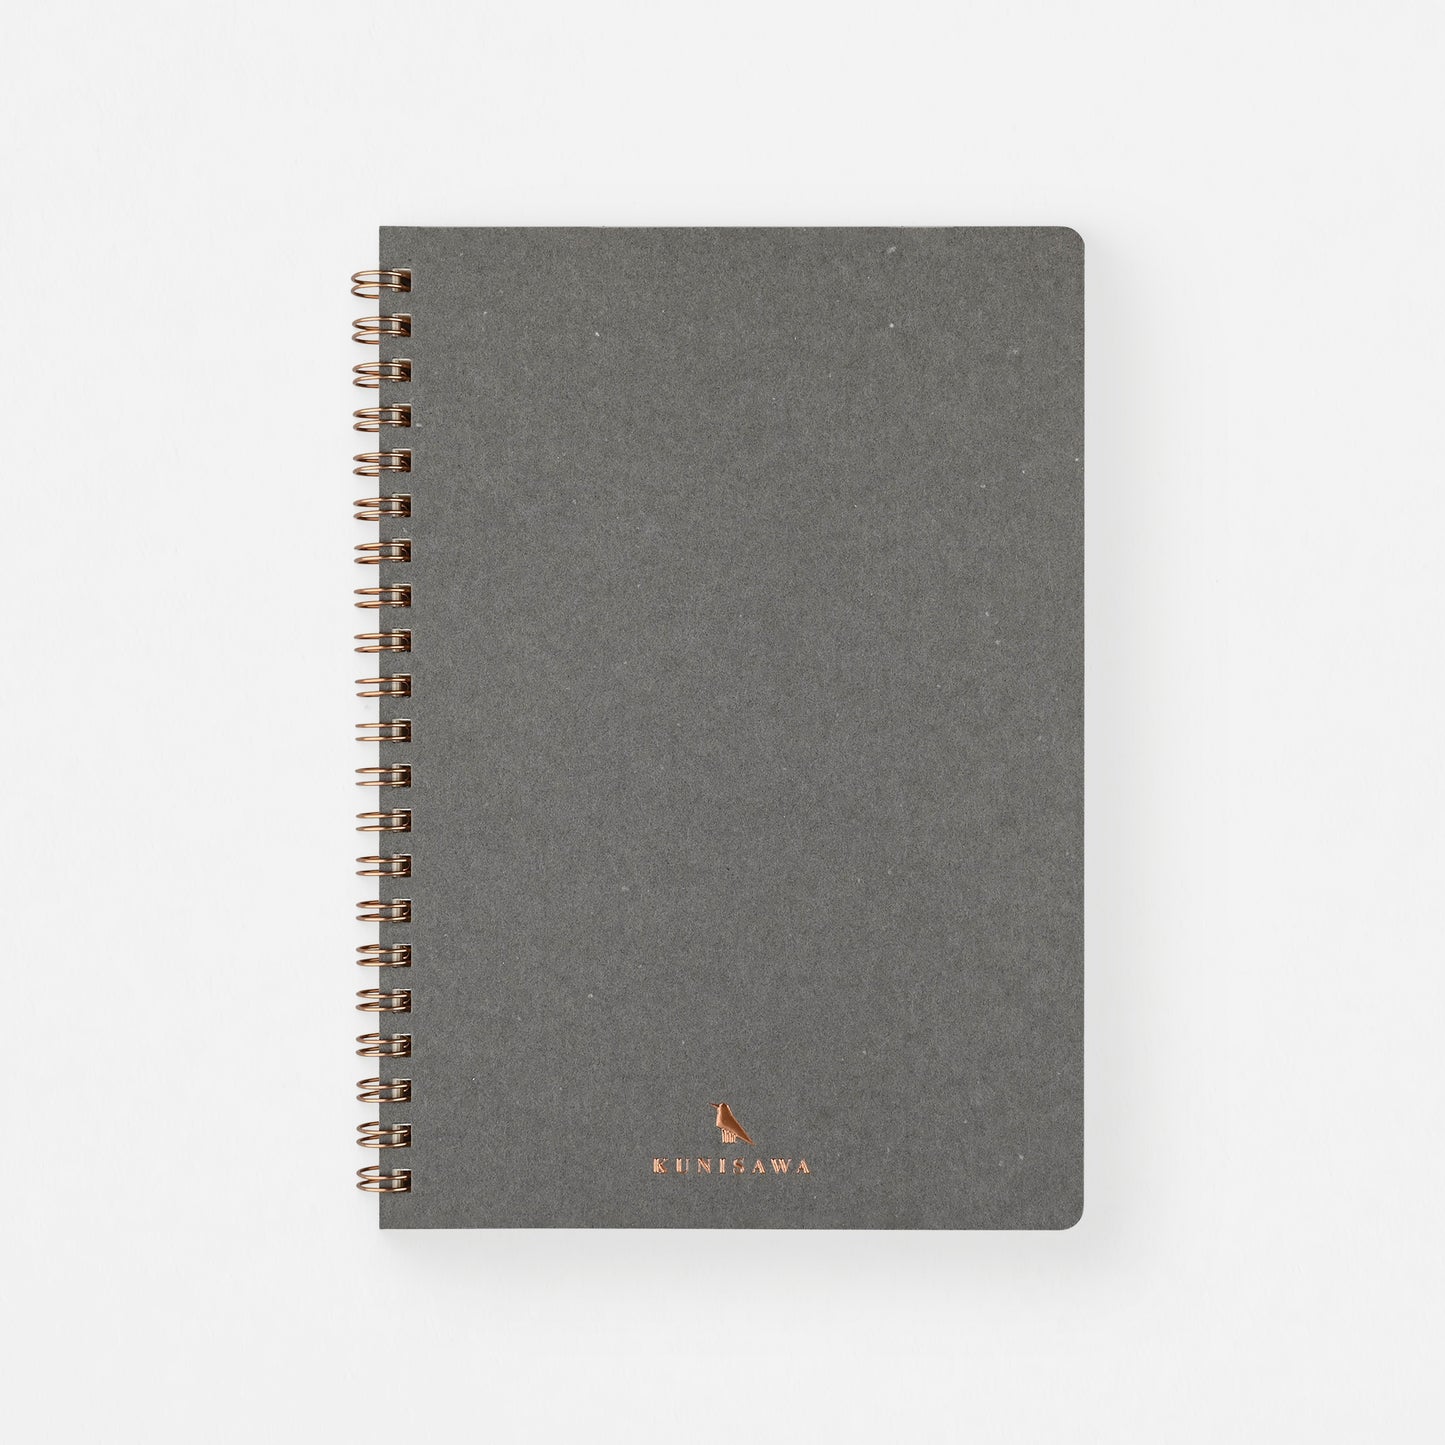 Kunisawa Find Ring Note Notebook A5 Or Executive | Grey, White, Charcoal, Blue Mist Or Indigo Grey / A5